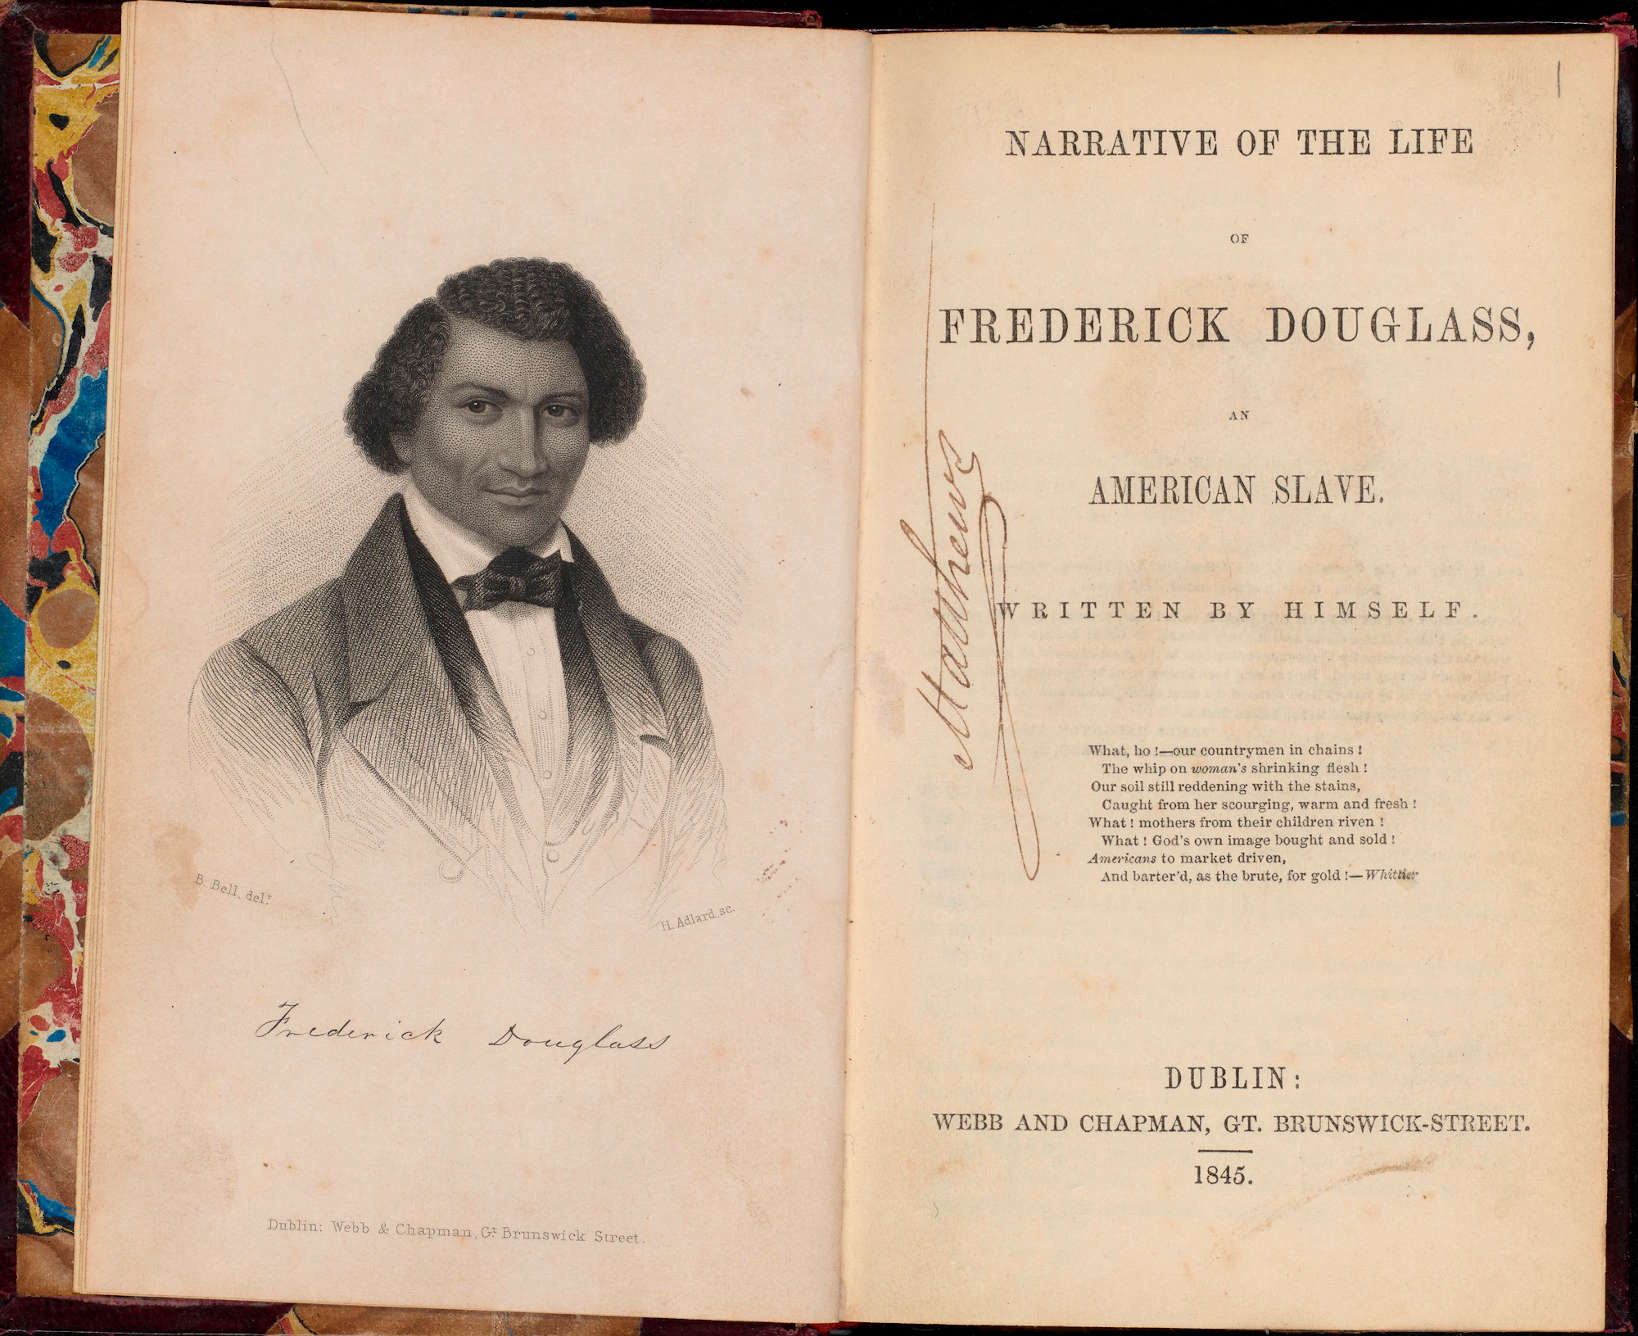 'Narrative of the Life of Frederick Douglass, An American Slave'